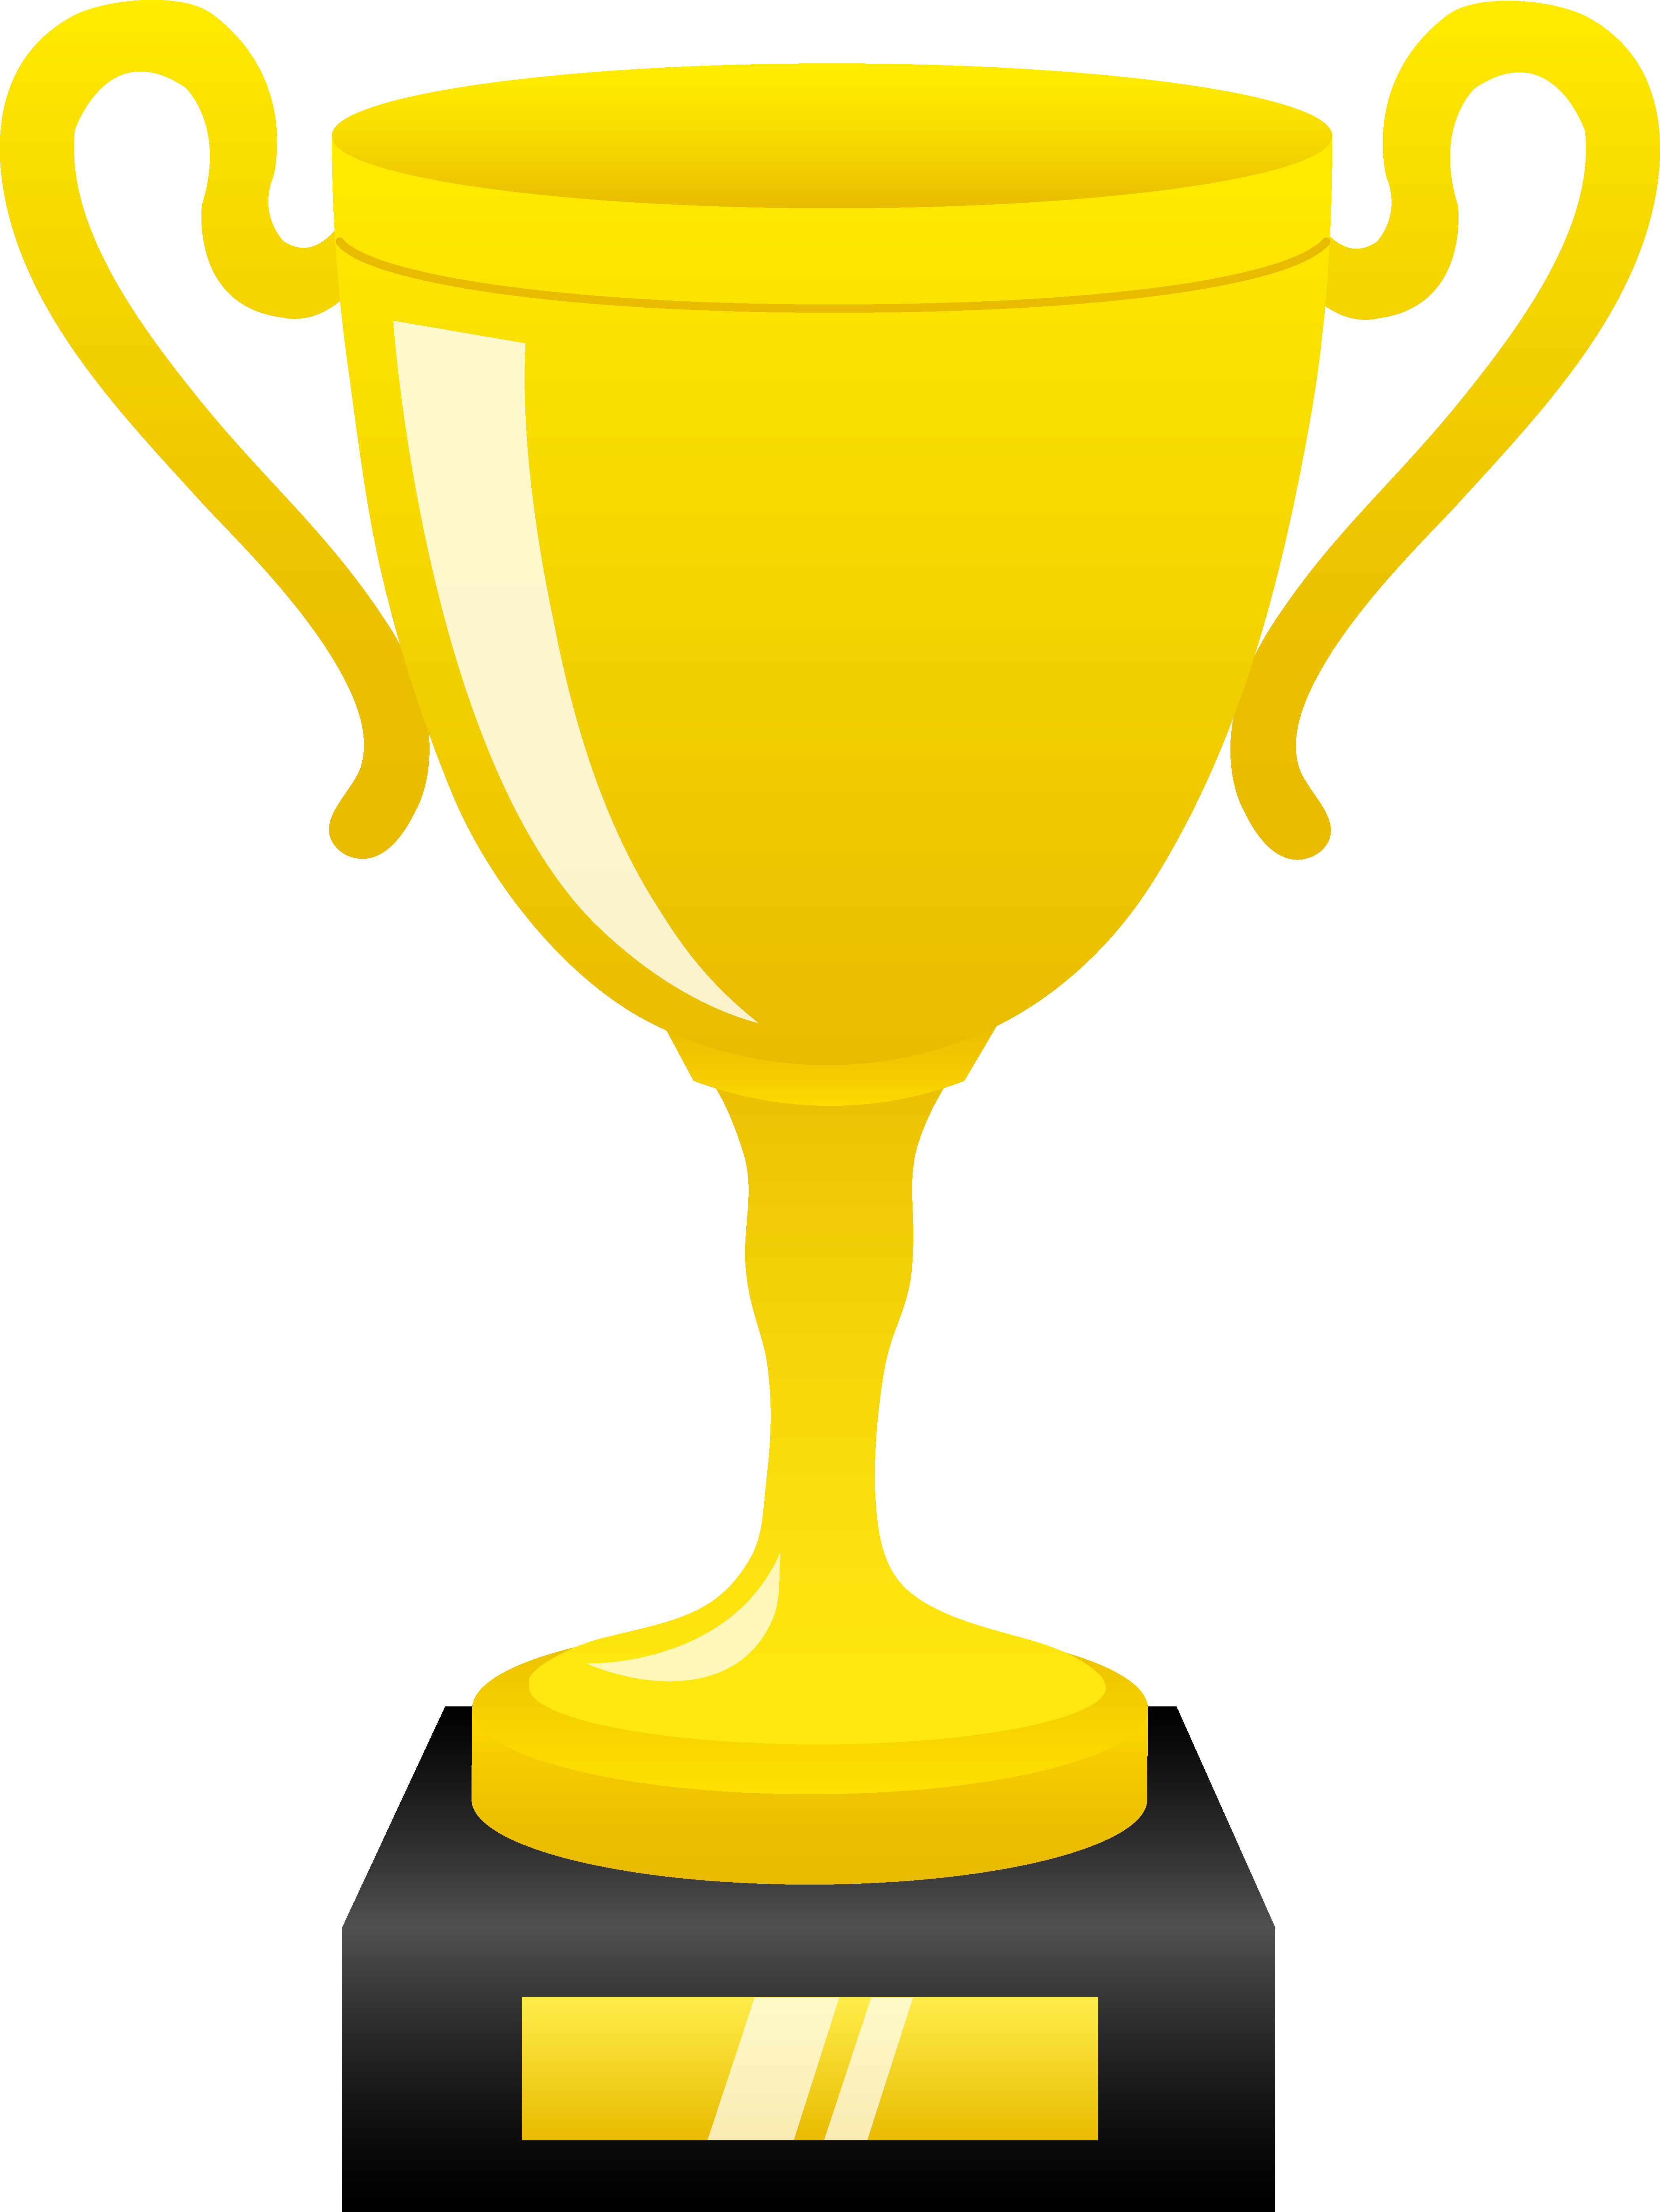 Shiny Golden Trophy Free clipart free image